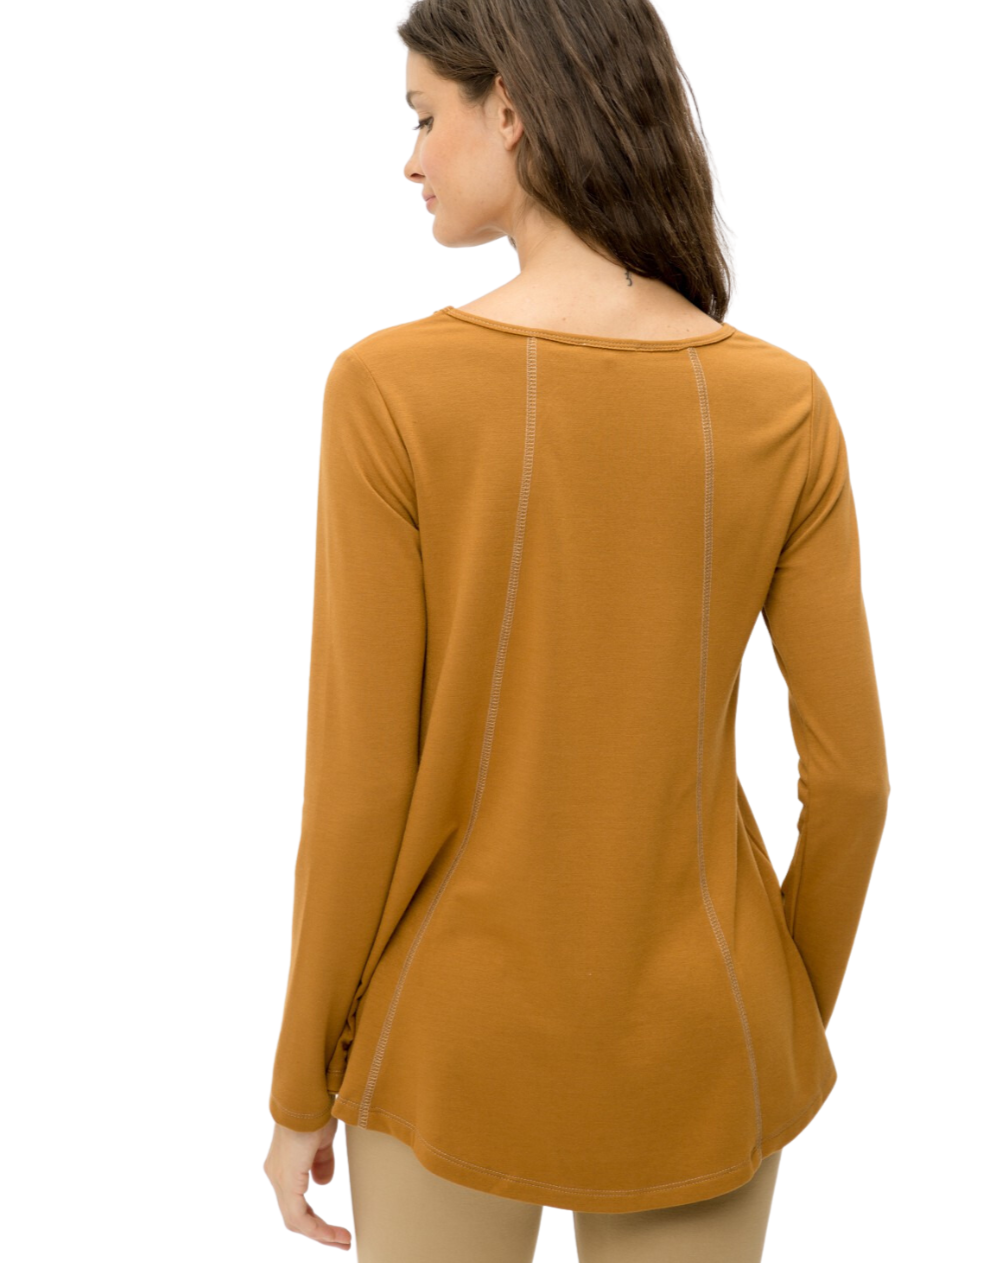 French Terry Scoop neck tunic